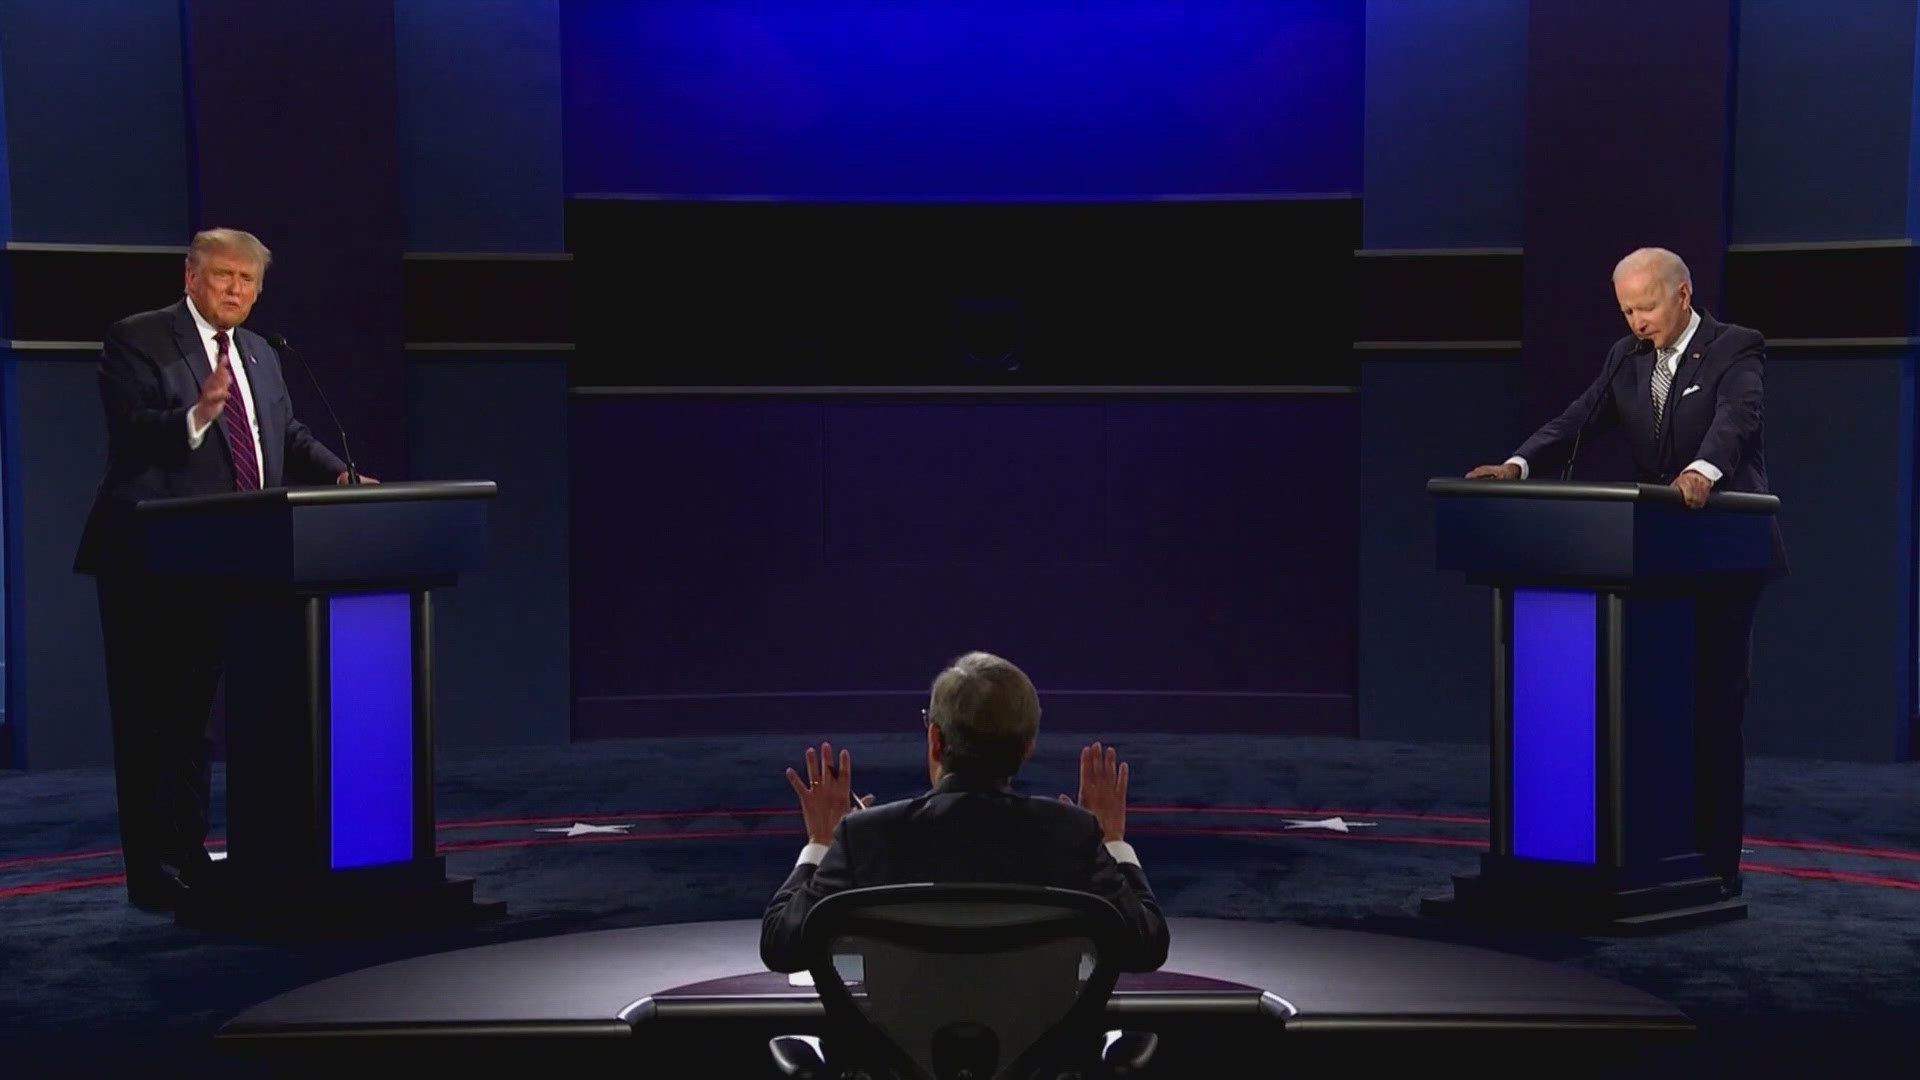 Just like in 2020, the debate will feature Biden and Trump.